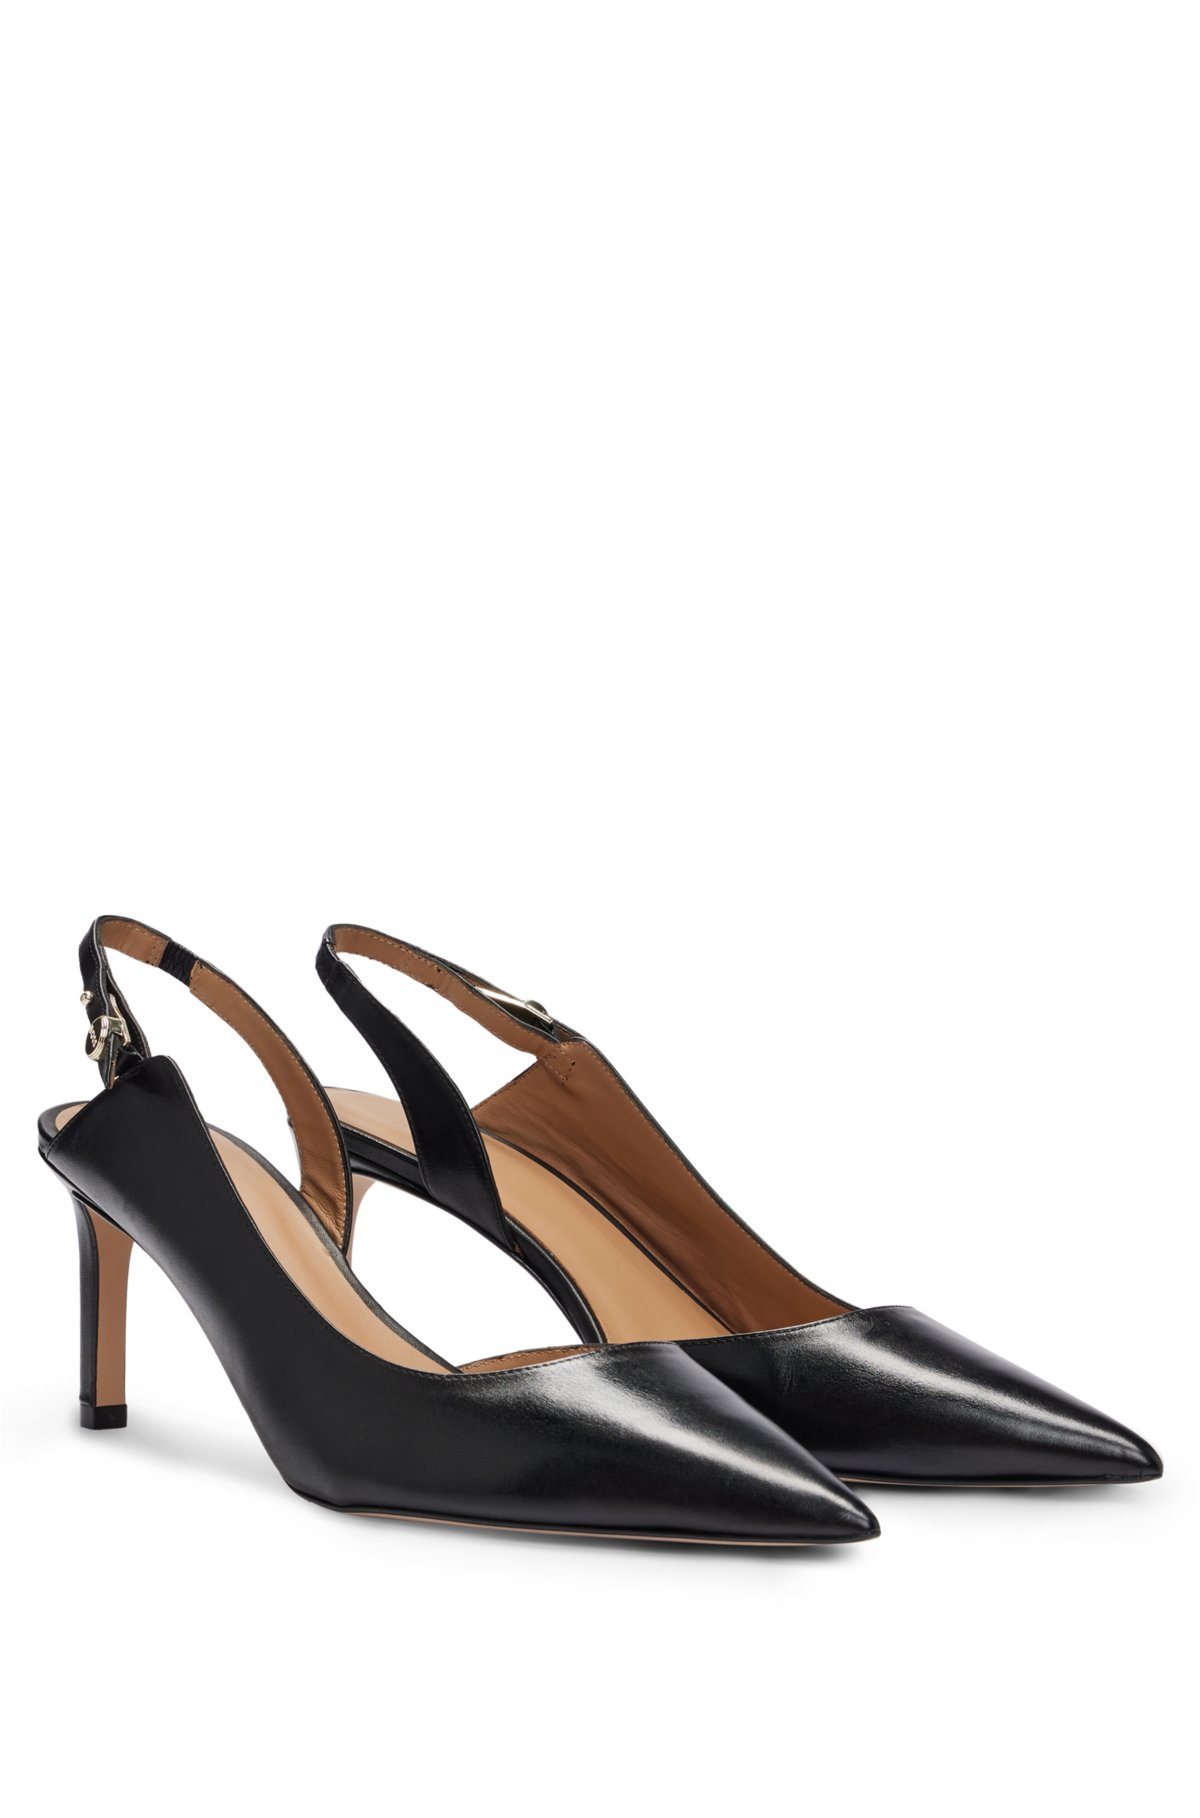 Patent leather-effect slingback shoes - Woman